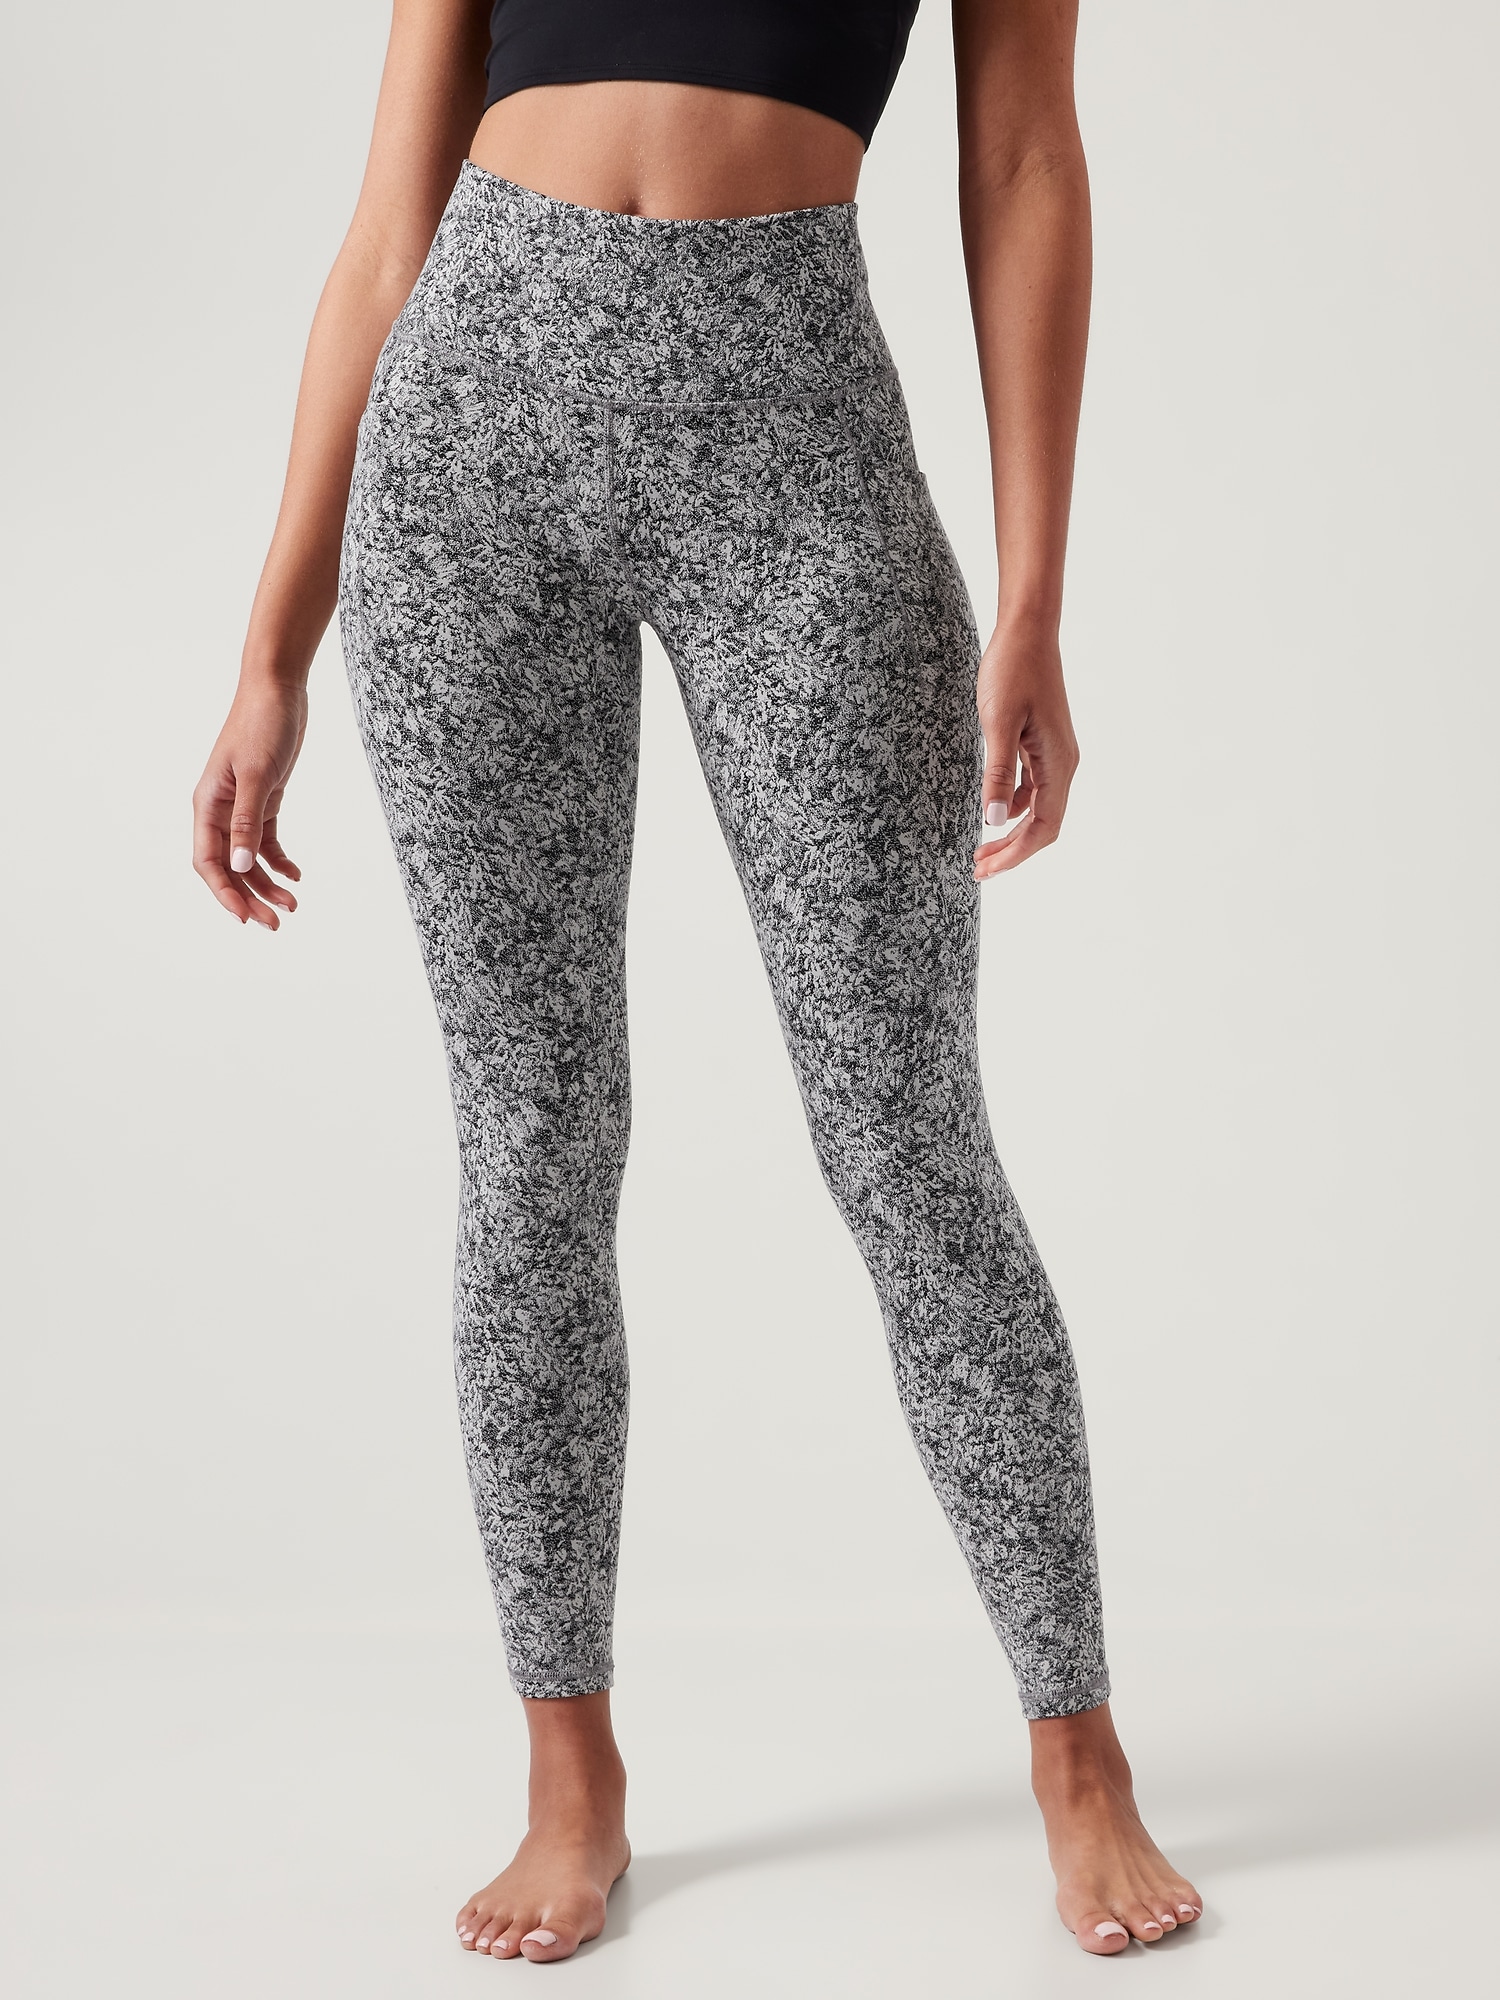 Top-Rated Tights From Athleta